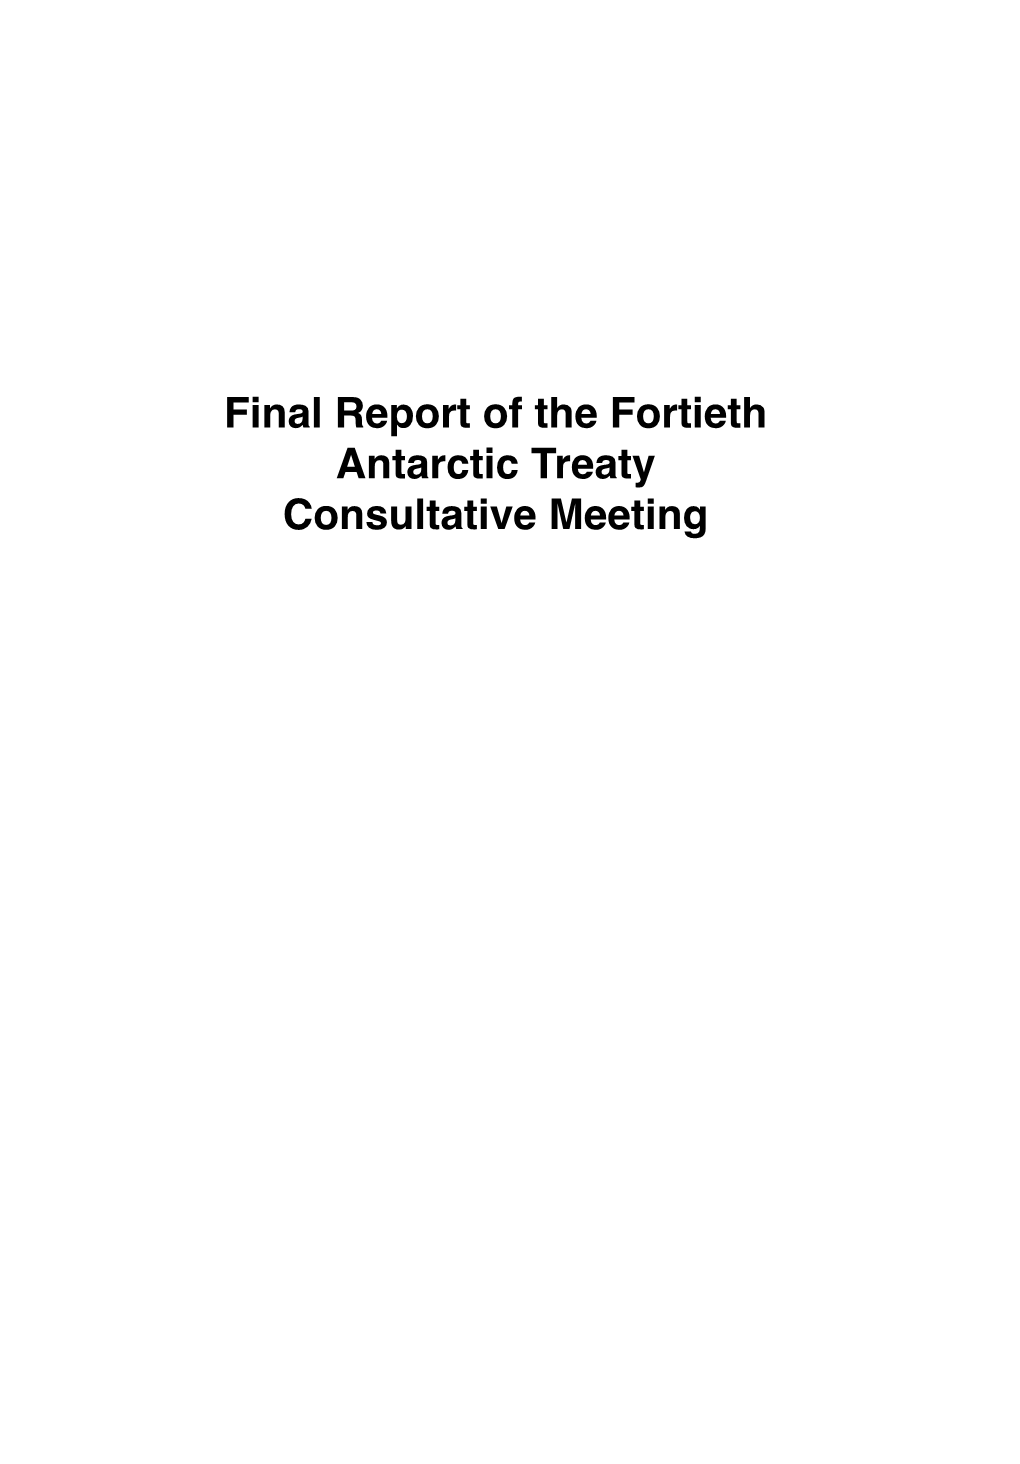 Final Report of the Fortieth Antarctic Treaty Consultative Meeting